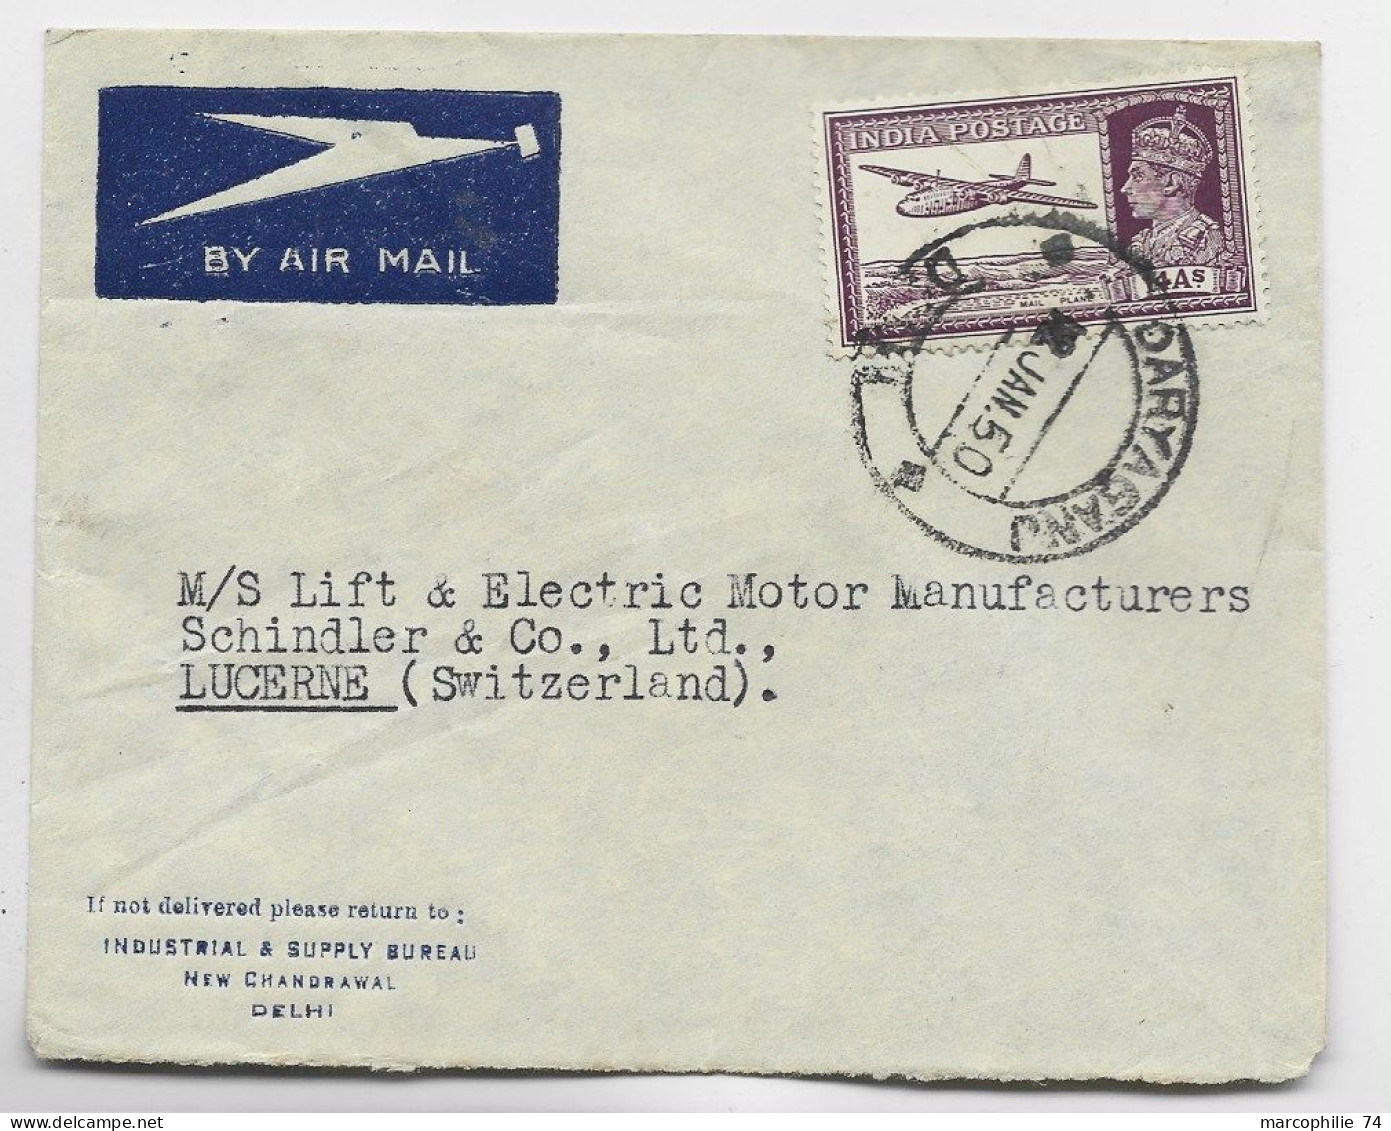 INDIA POSTAGE 14AS SOLO LETTRE COVER AIR MAIL DARYAGANU 12 JANV 1950 TO SUISSE - 1936-47 King George VI